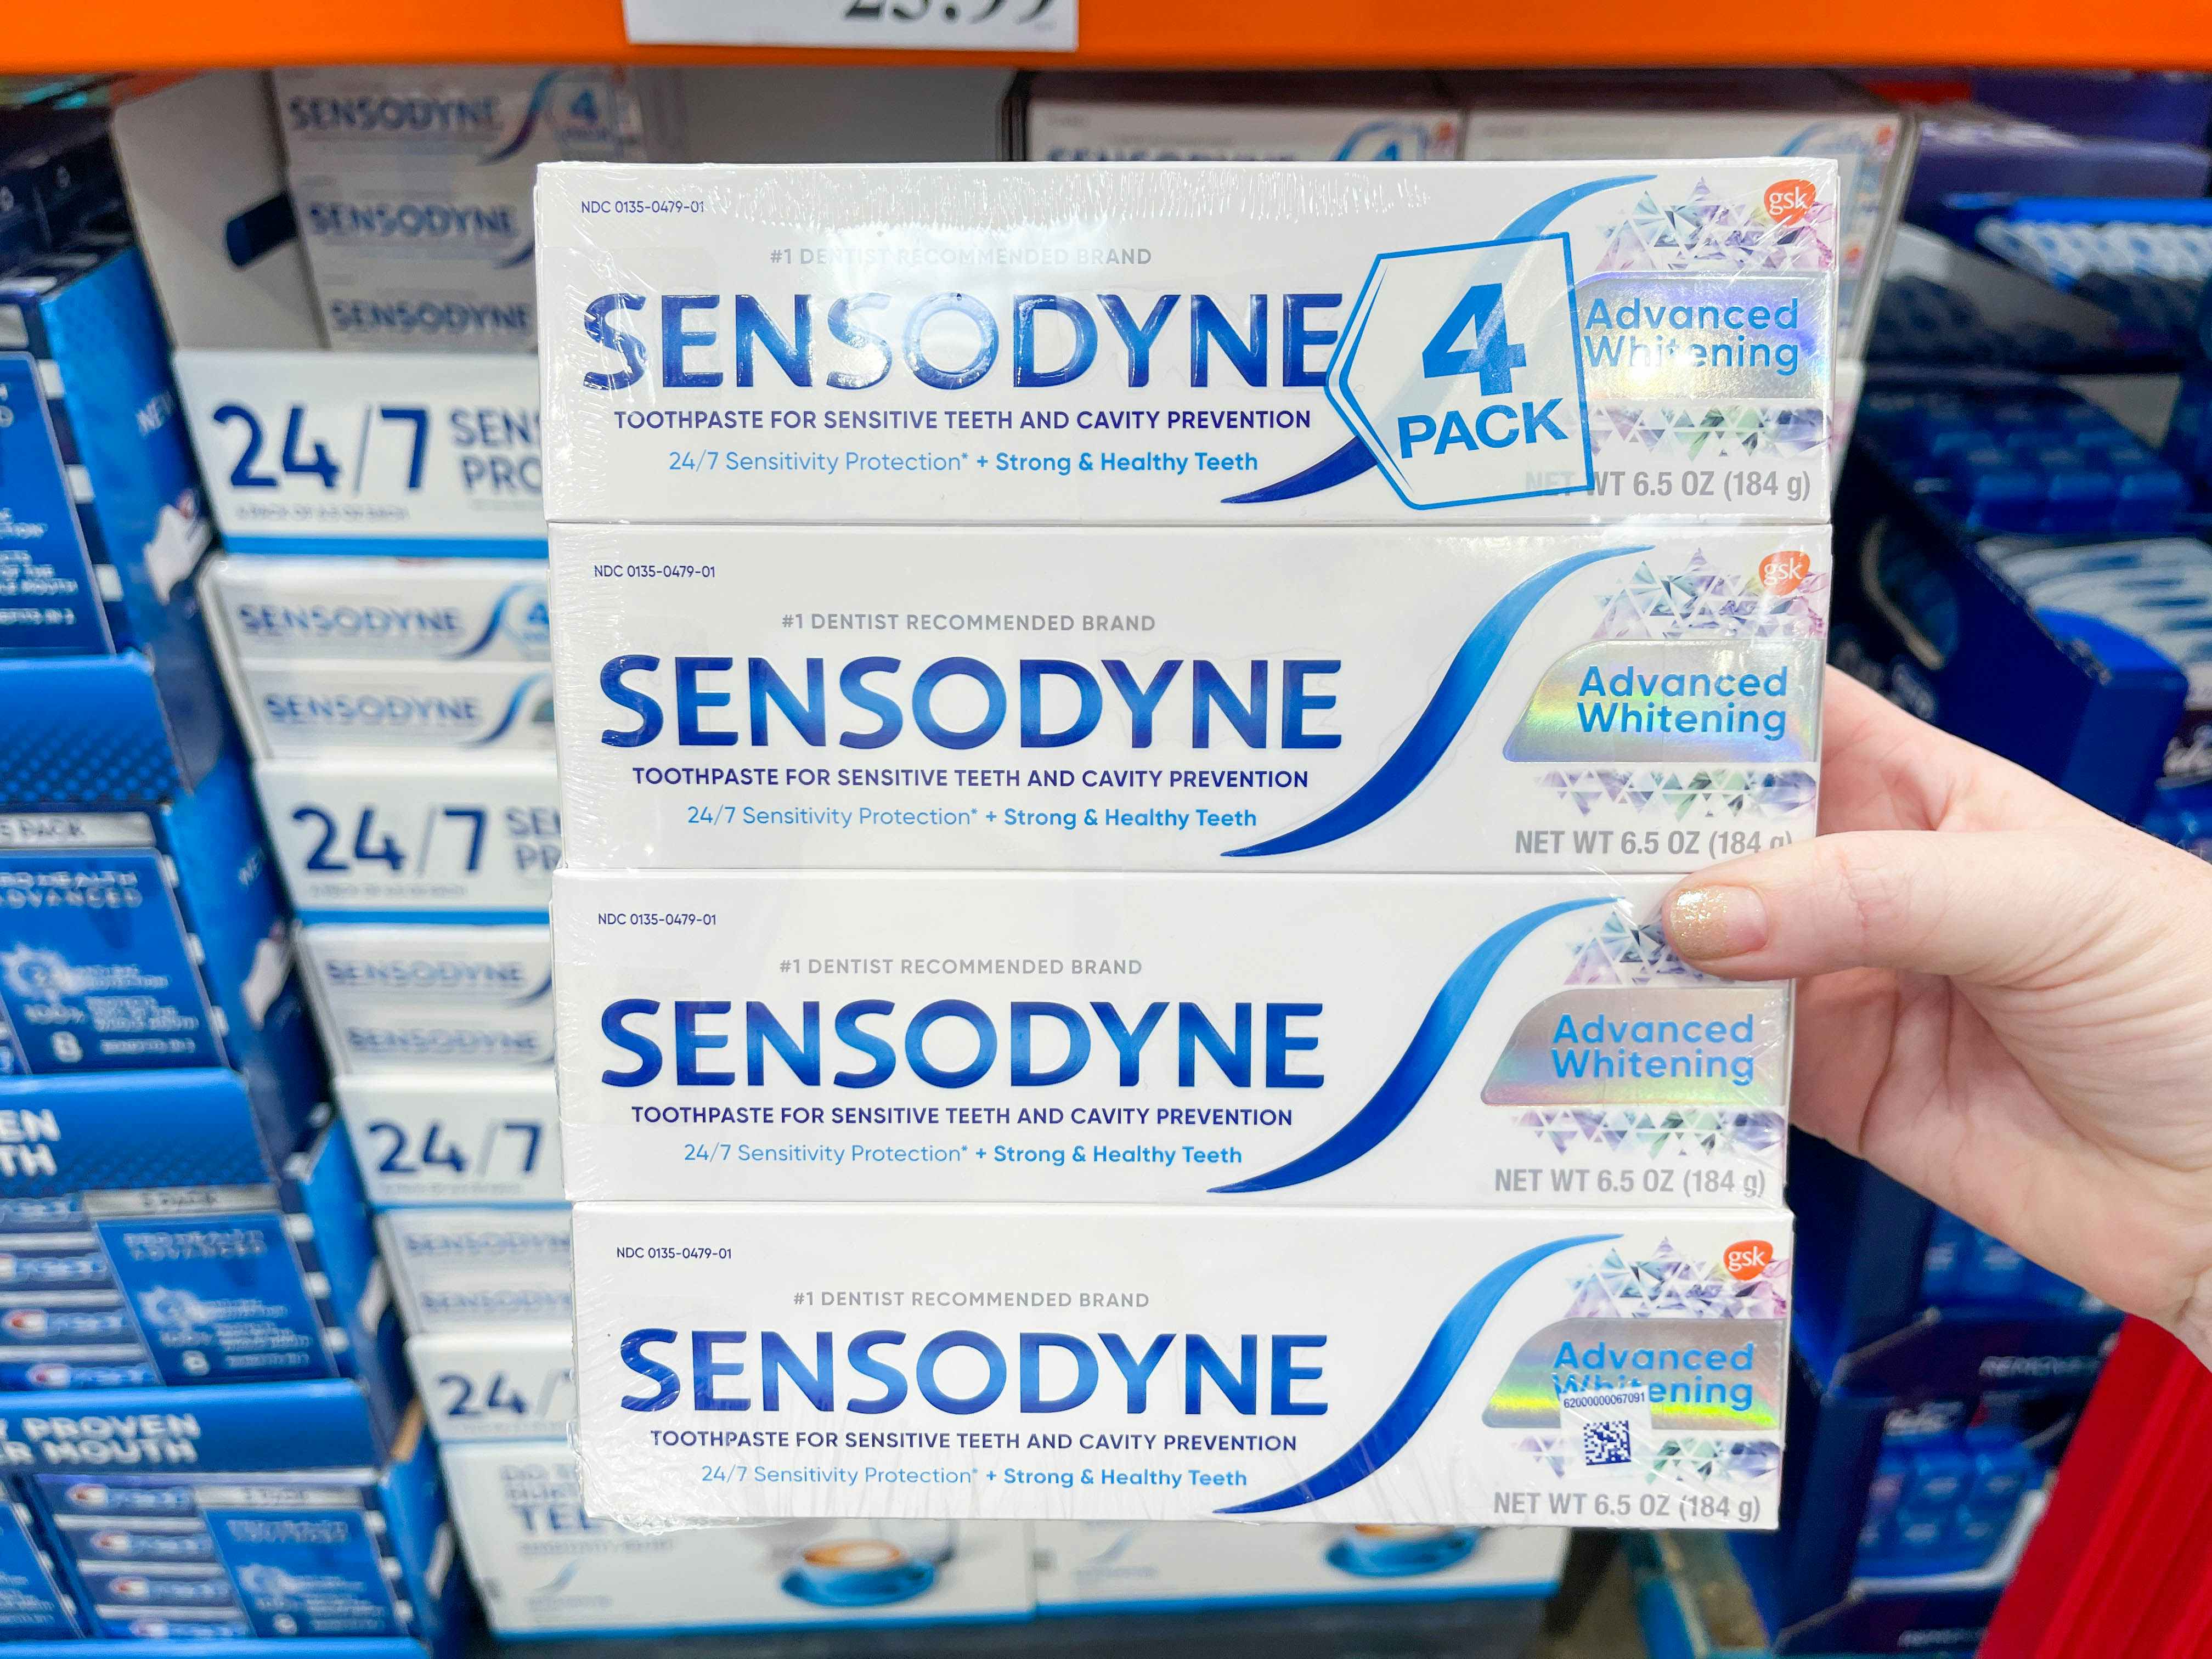 four boxes of toothpaste packaged together being held in store